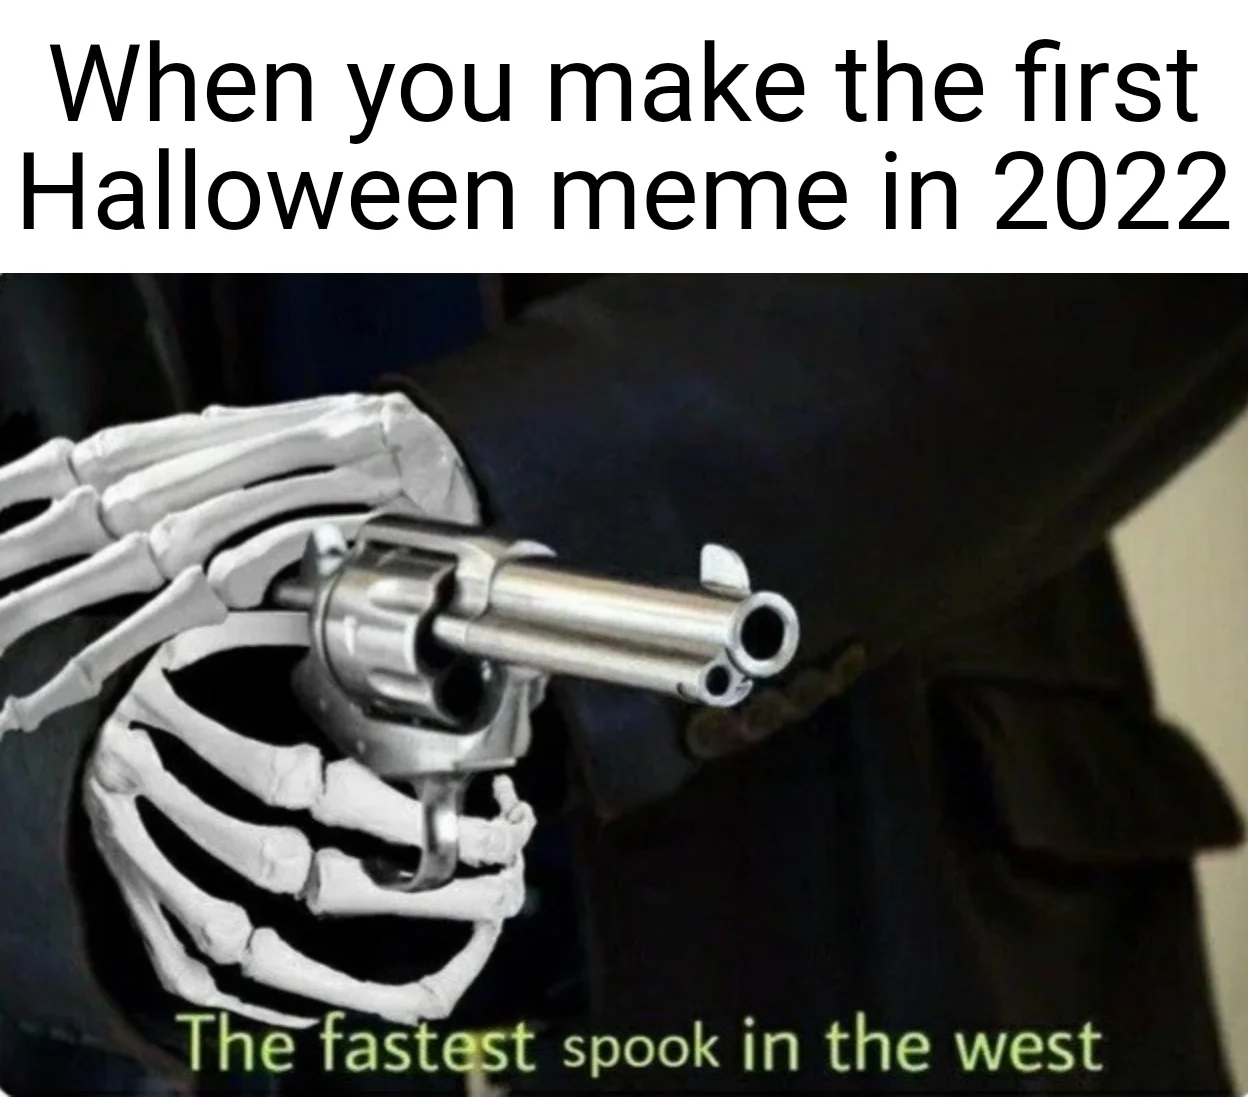 halloween memes - halloween new year meme - When you make the first Halloween meme in 2022 The fastest spook in the west